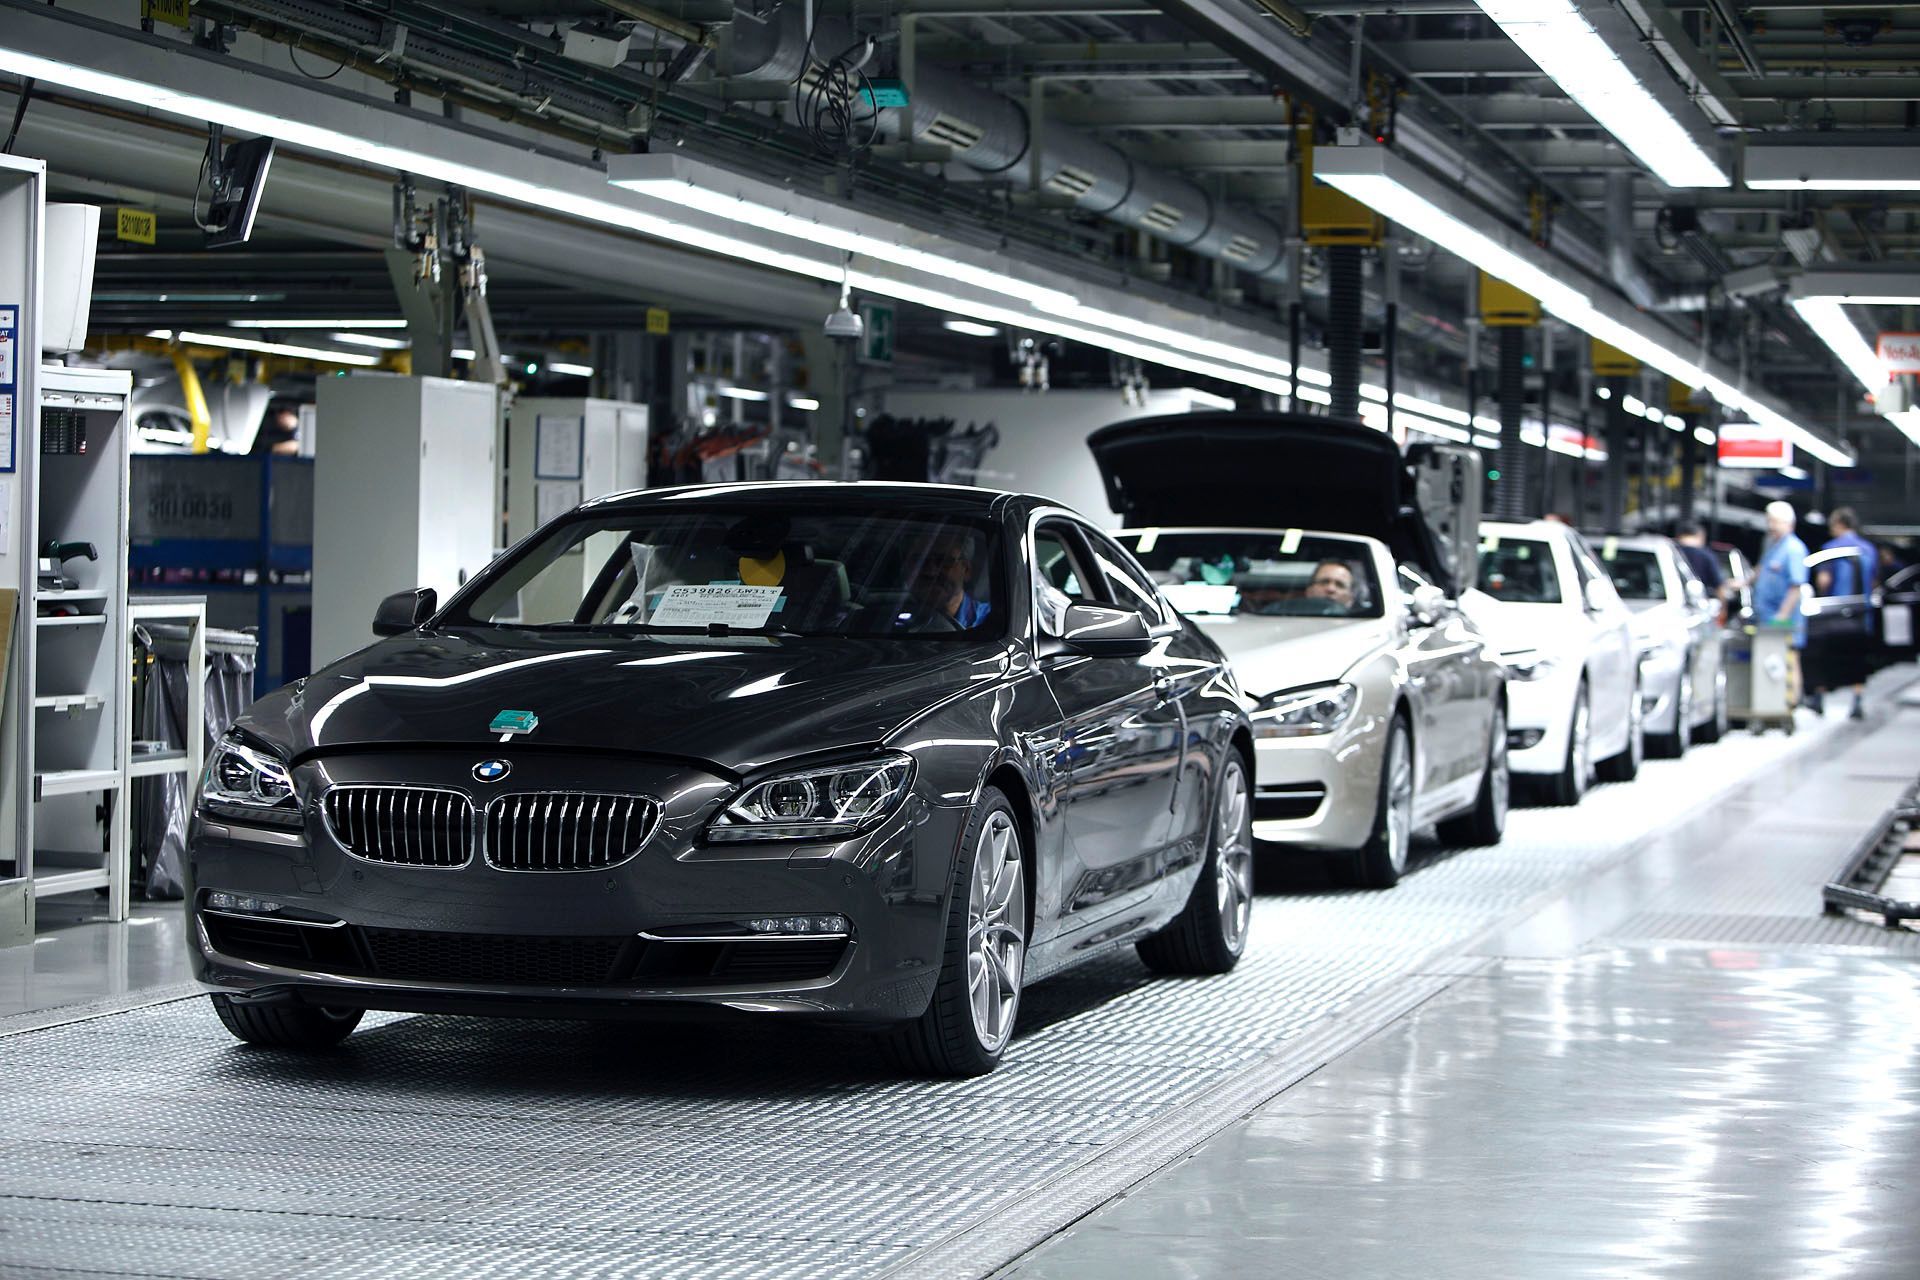 Bmw new plant in mexico #3